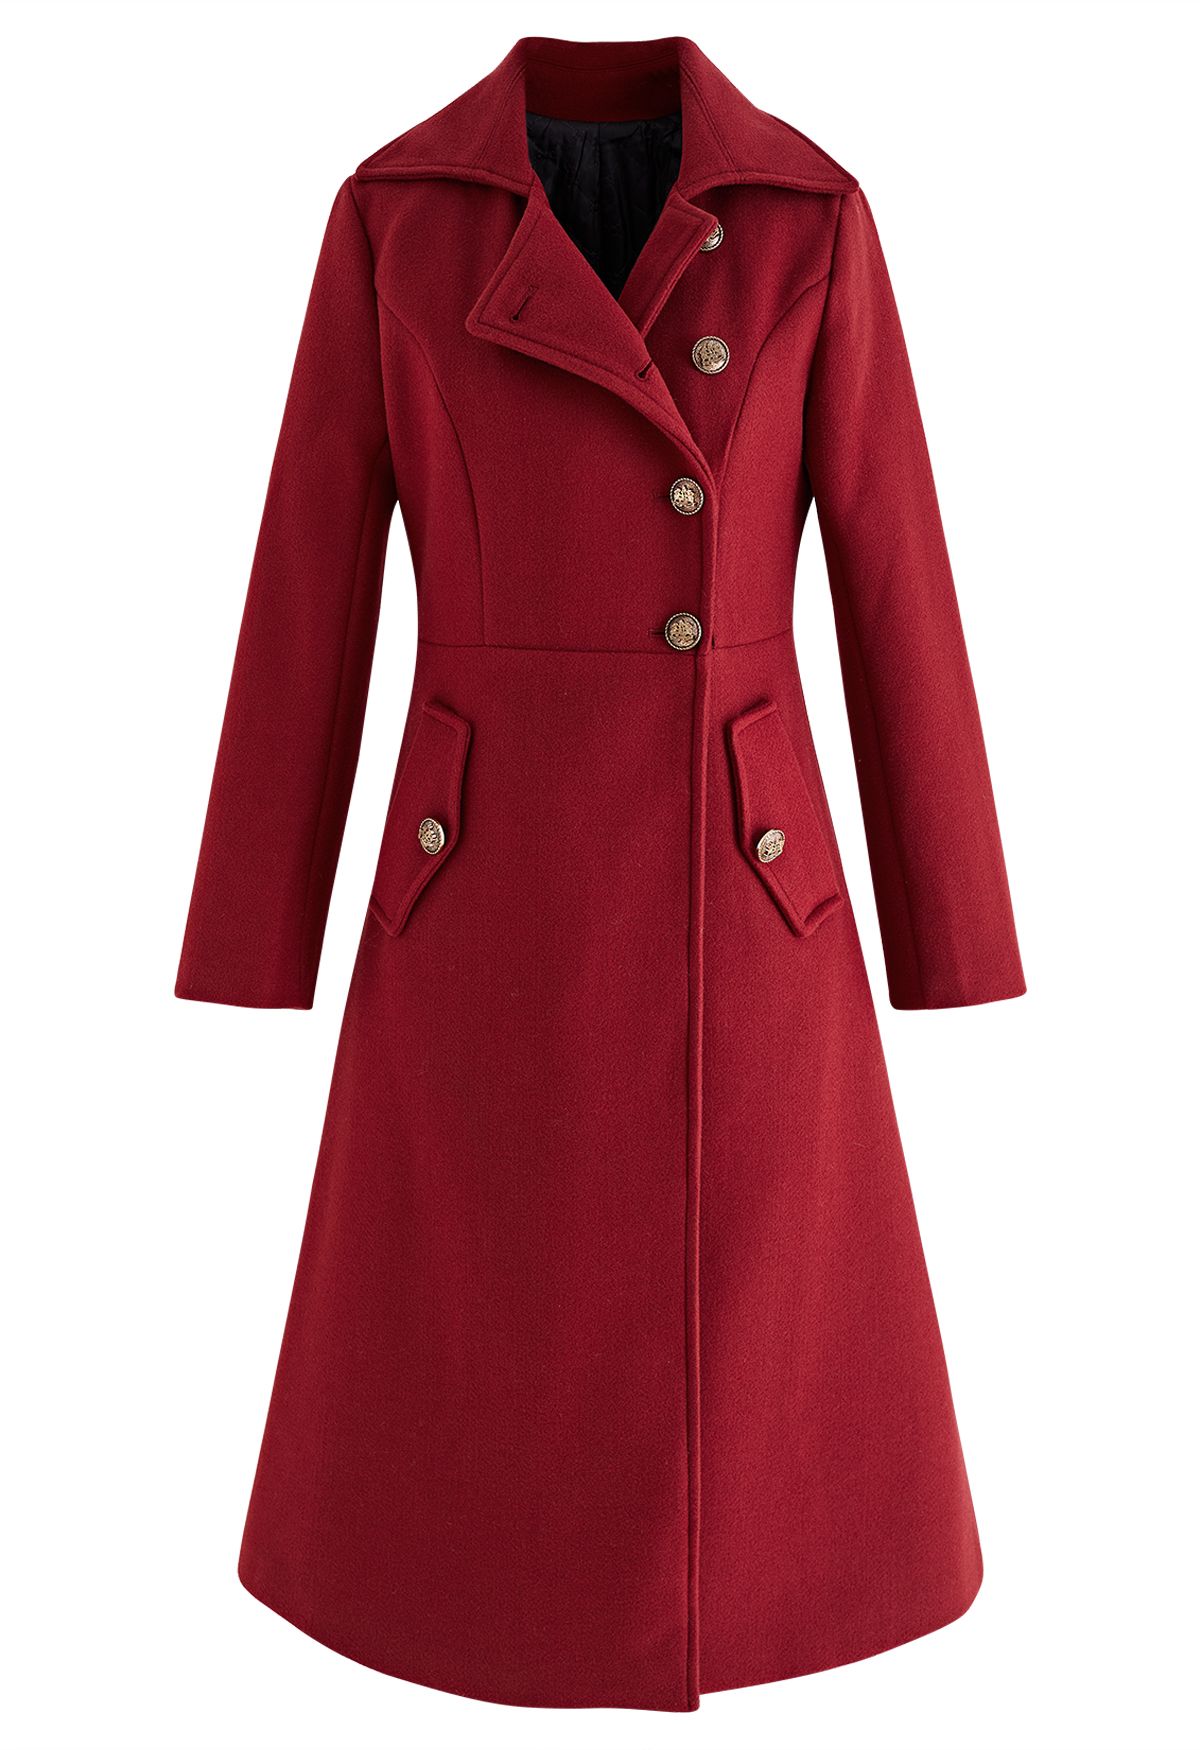 Modish Golden Button Wool-Blend Longline Coat in Red - Retro, Indie and ...